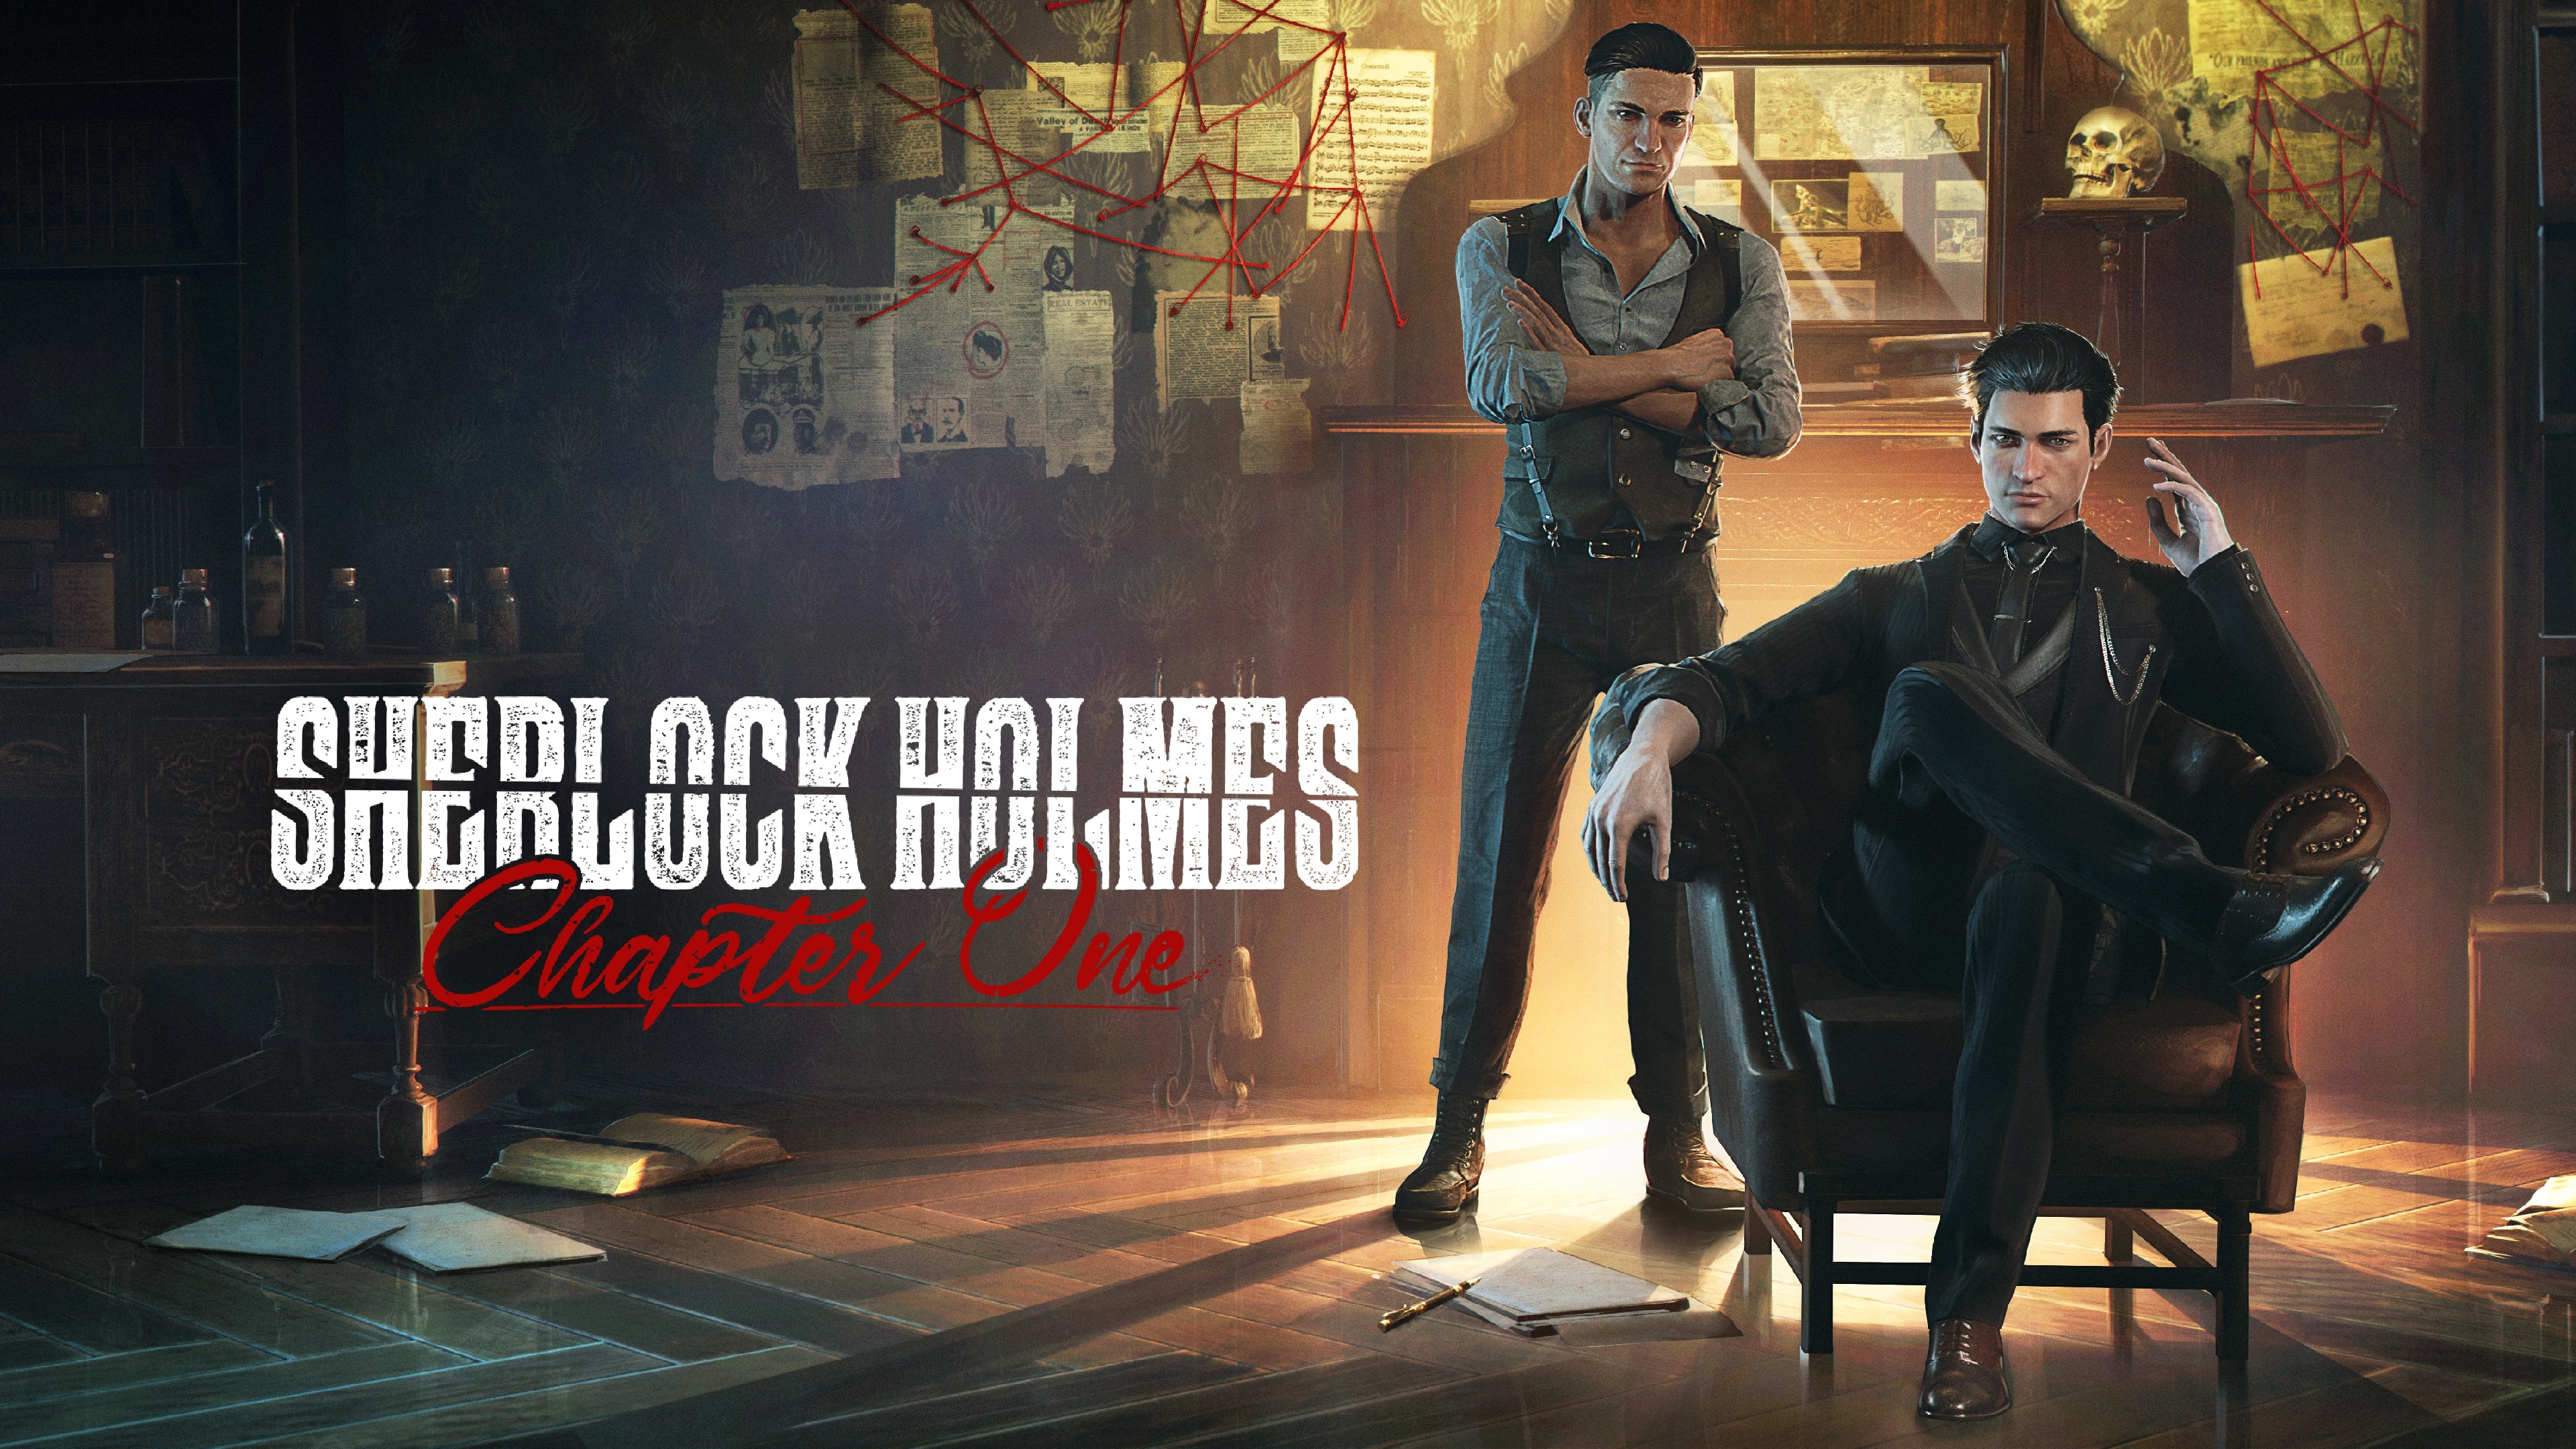 SI TORNA AD INDAGARE, SHERLOCK HOLMES: CHAPTER ONE (16/11/20)